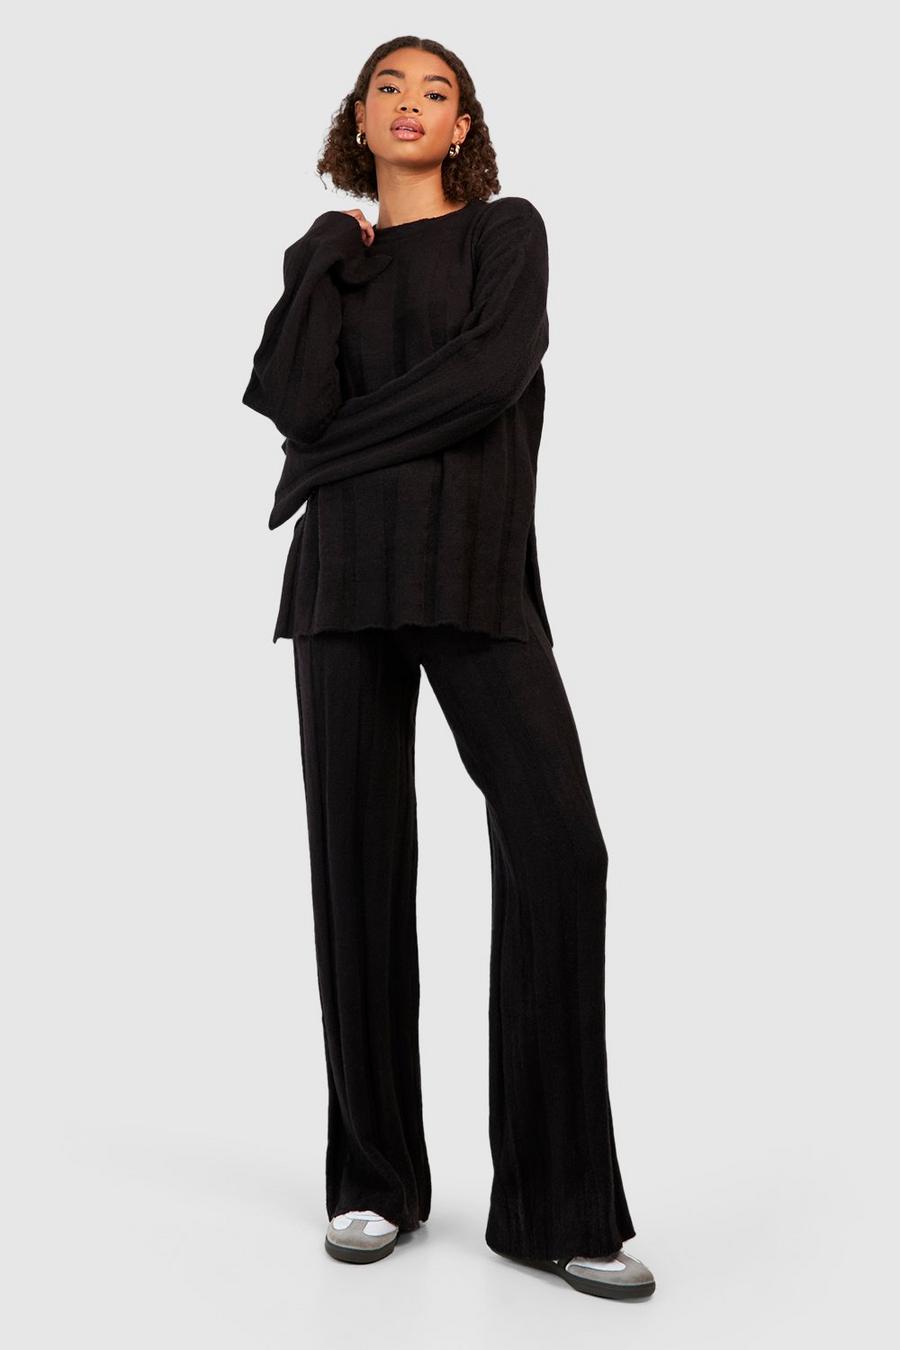 Black Tall Soft Knit Wide Rib Jumper And Flares Knitted Co-ord